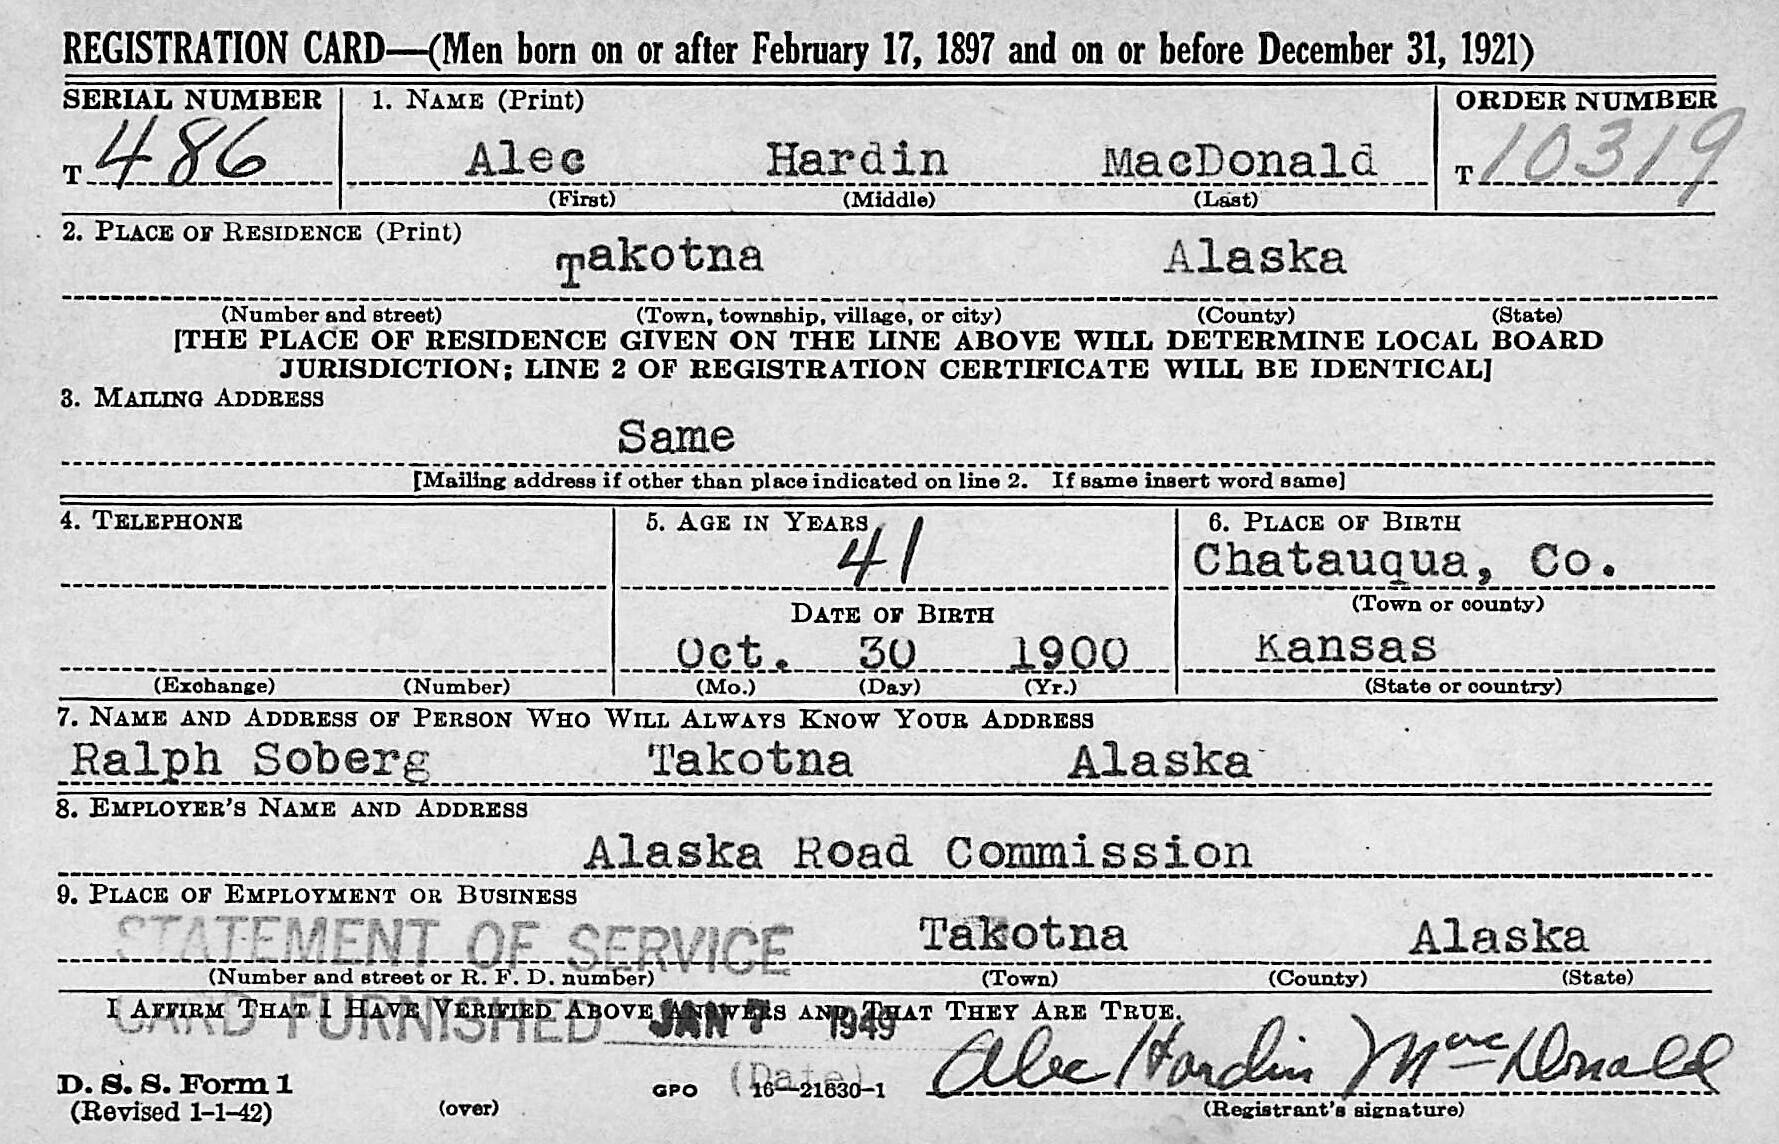 [Alec Hardin MacDonald draft reg—] When Takotna resident Alec MacDonald registered in February 1942 for the military draft, he falsely claimed to have been born in 1900 in Chautauqua County, Kansas.